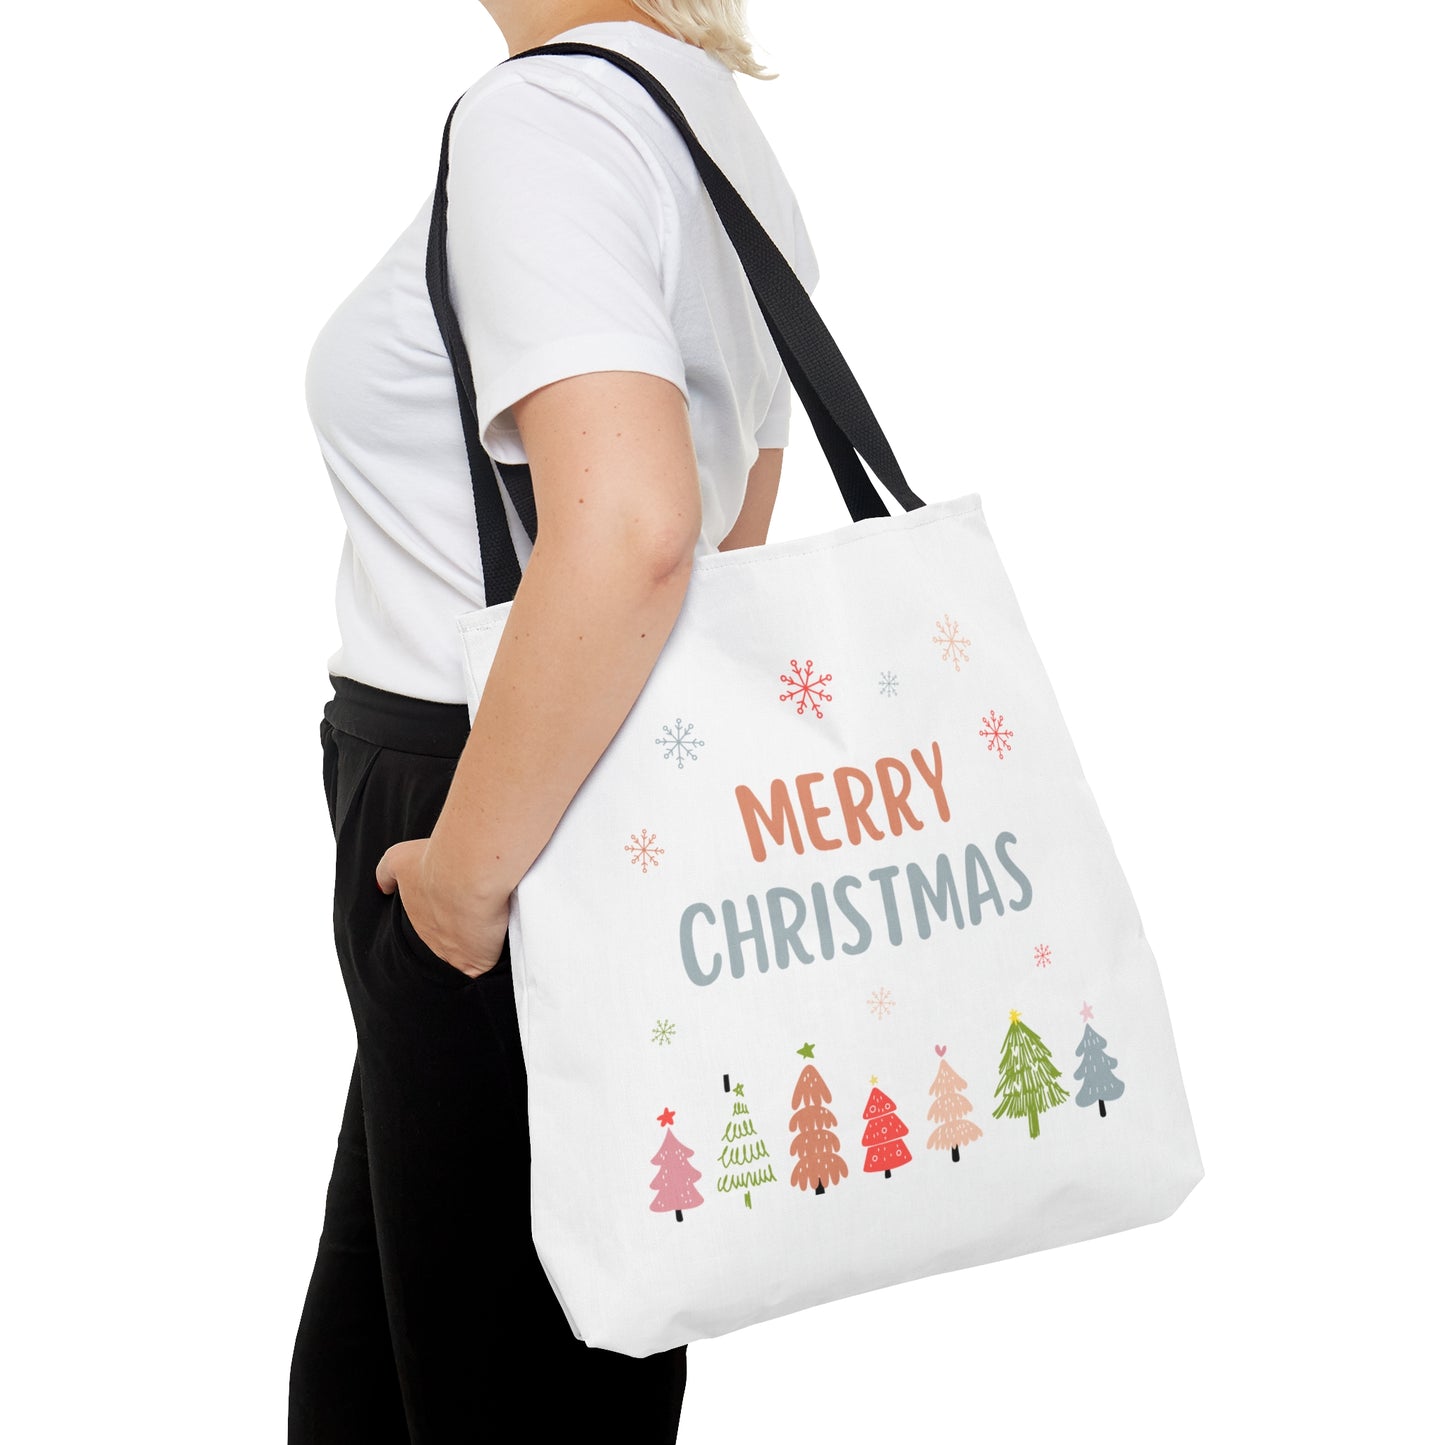 Merry Christmas with Trees Printed Tote Bag